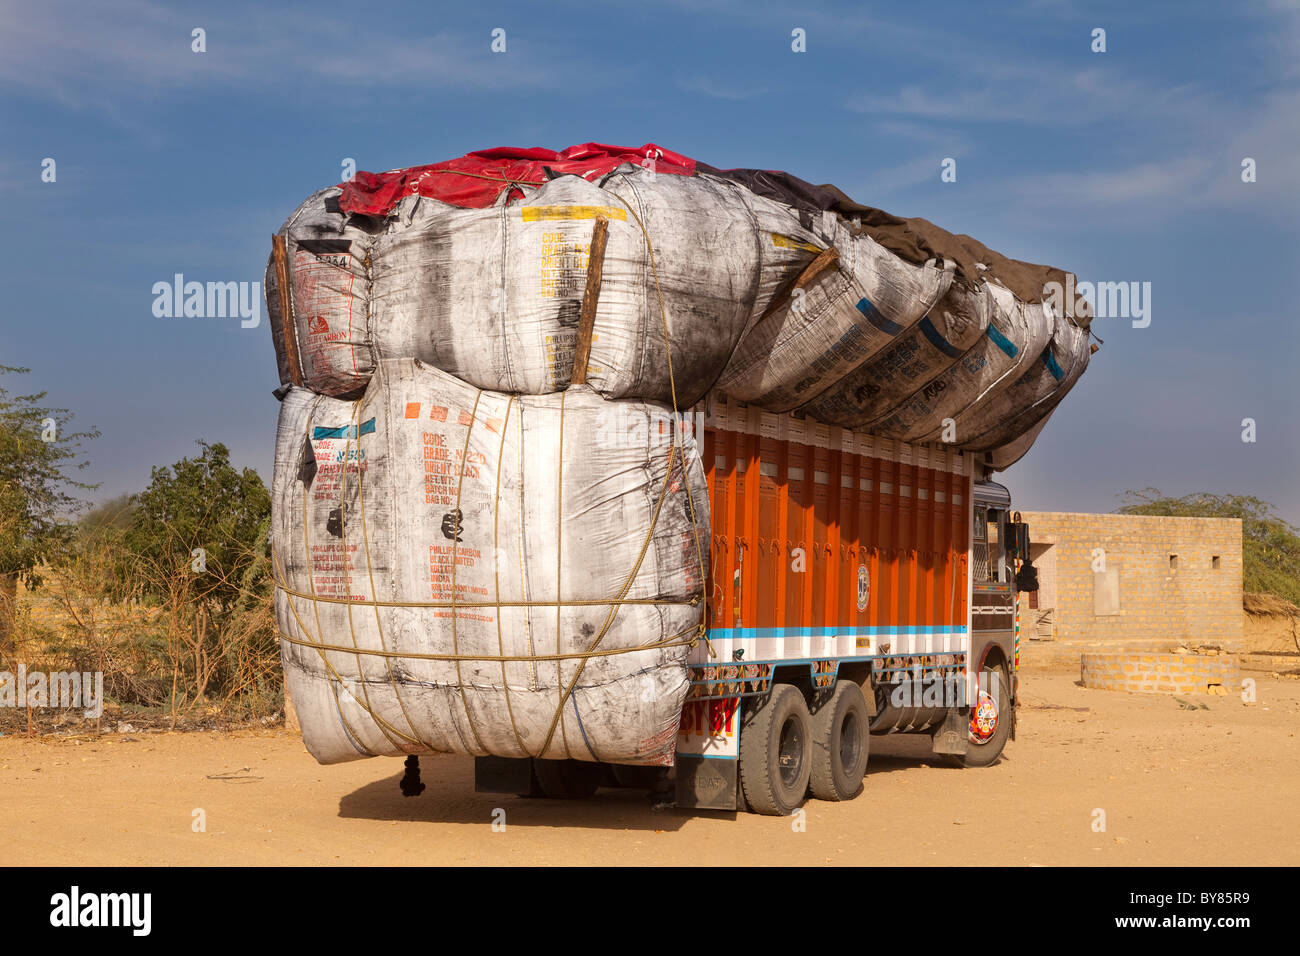 India, Rajasthan, Overloaded goods lorry with bald tyres and no rear reegistration plate Stock Photo